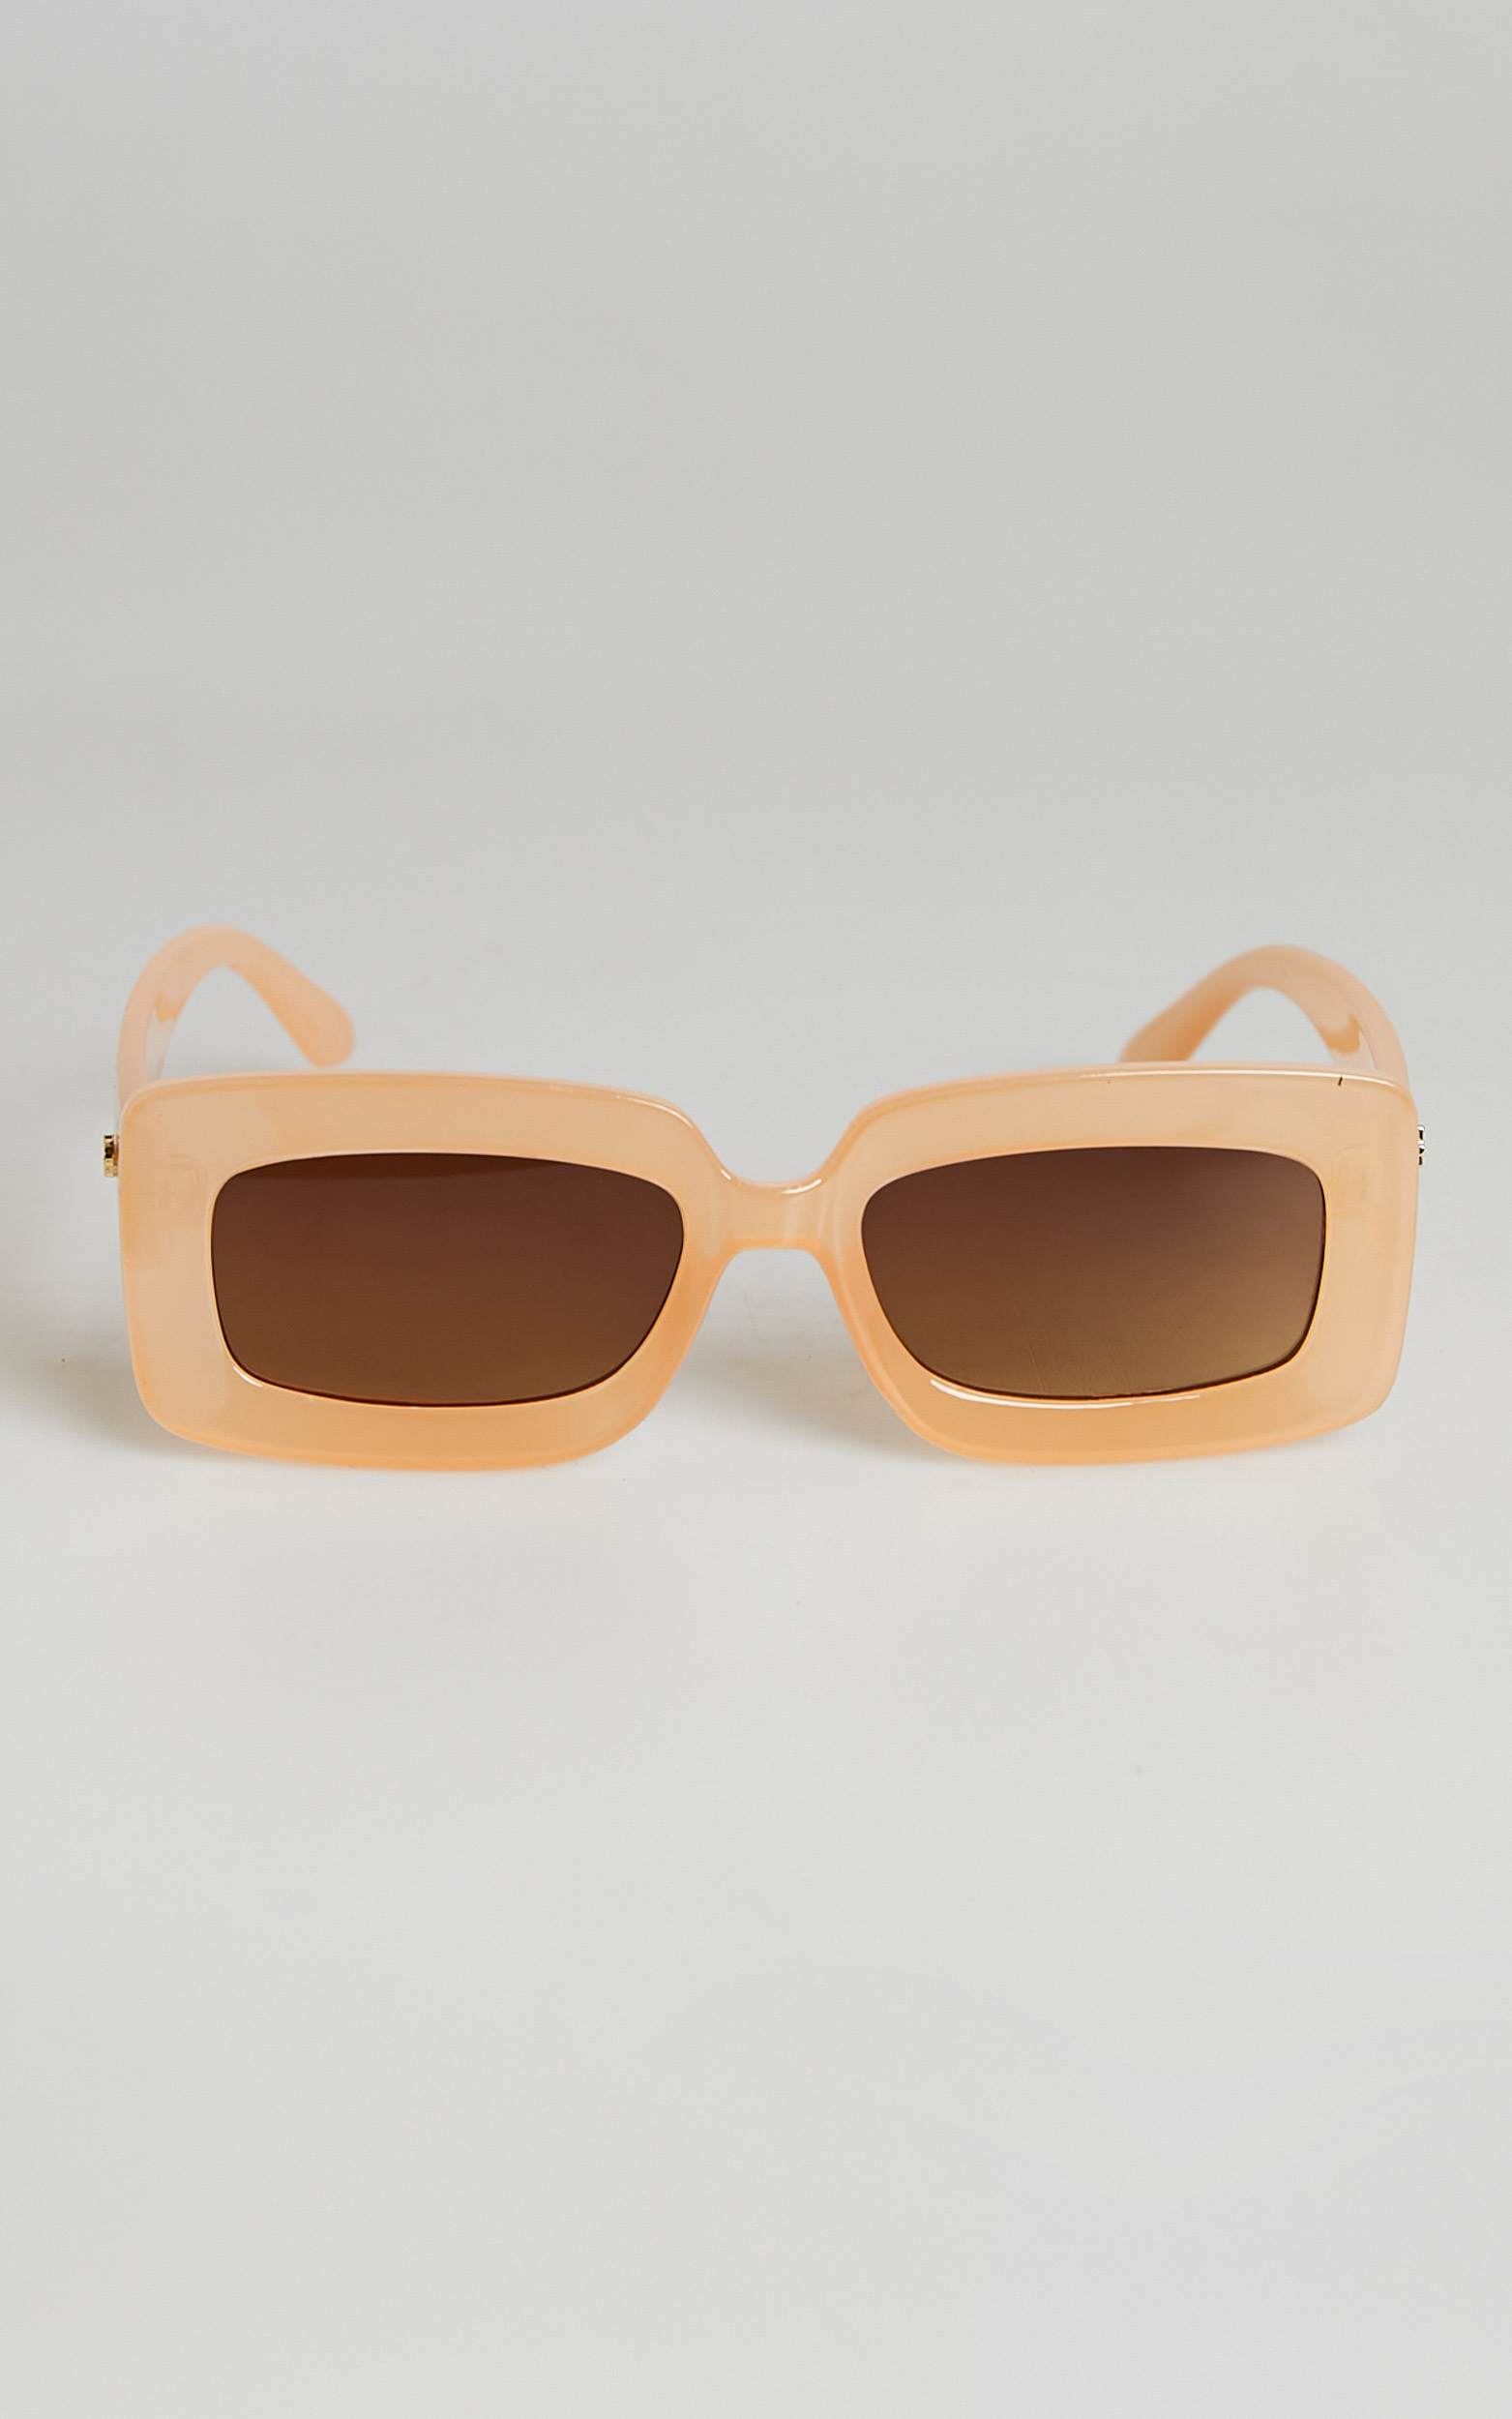 Peta and Jain - Blurred Sunglasses in Peach/Faded Brown - NoSize, ORG1, hi-res image number null